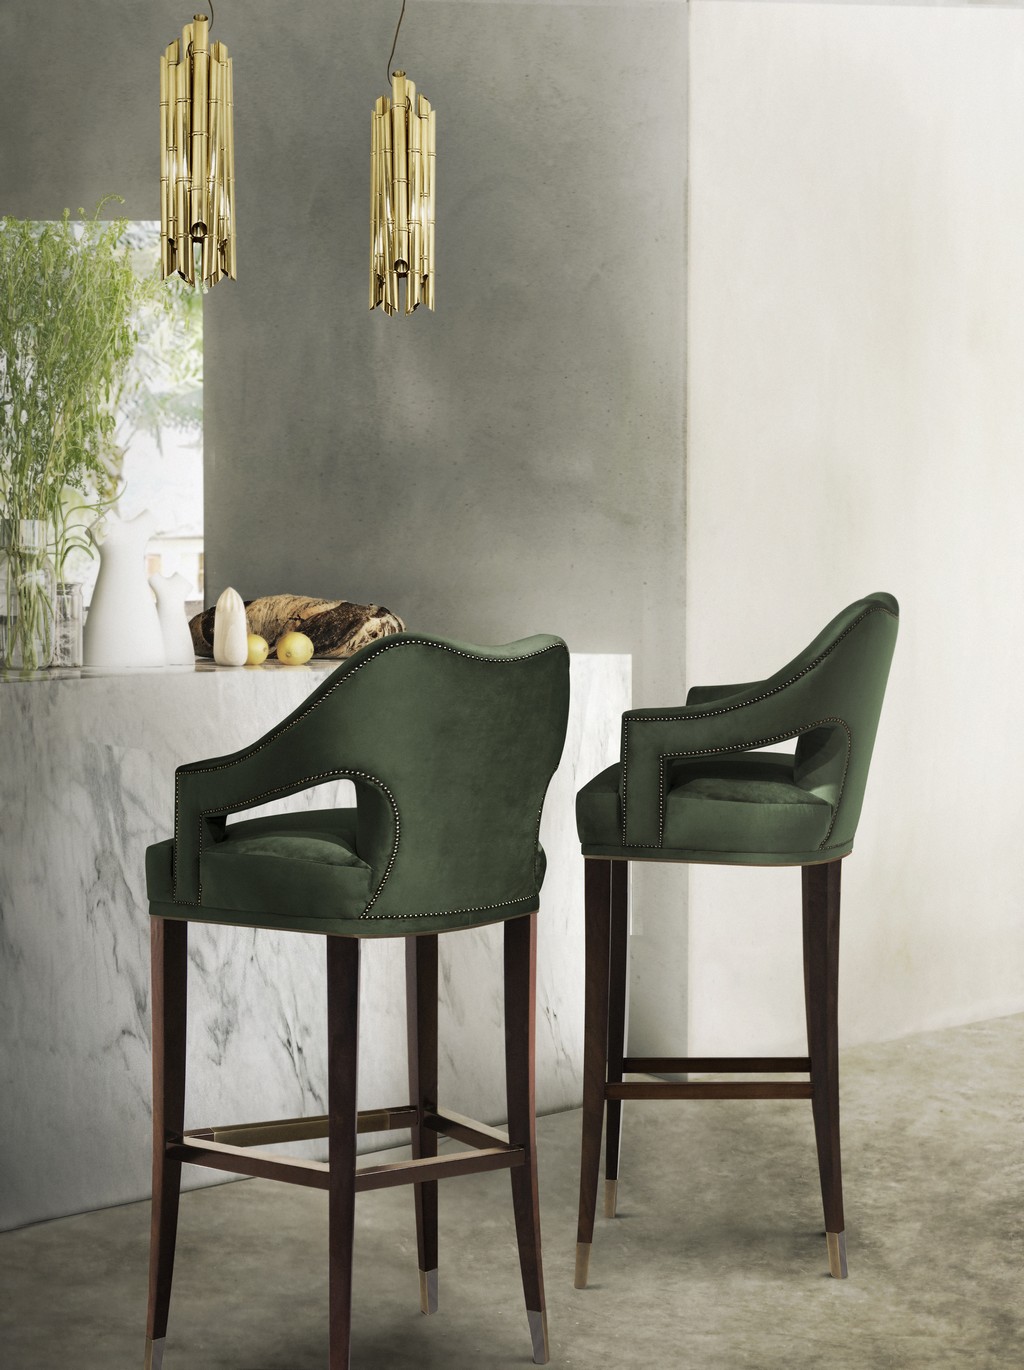 Choose the Best Green Bar Stools to Liven Up Your Home this Winter!